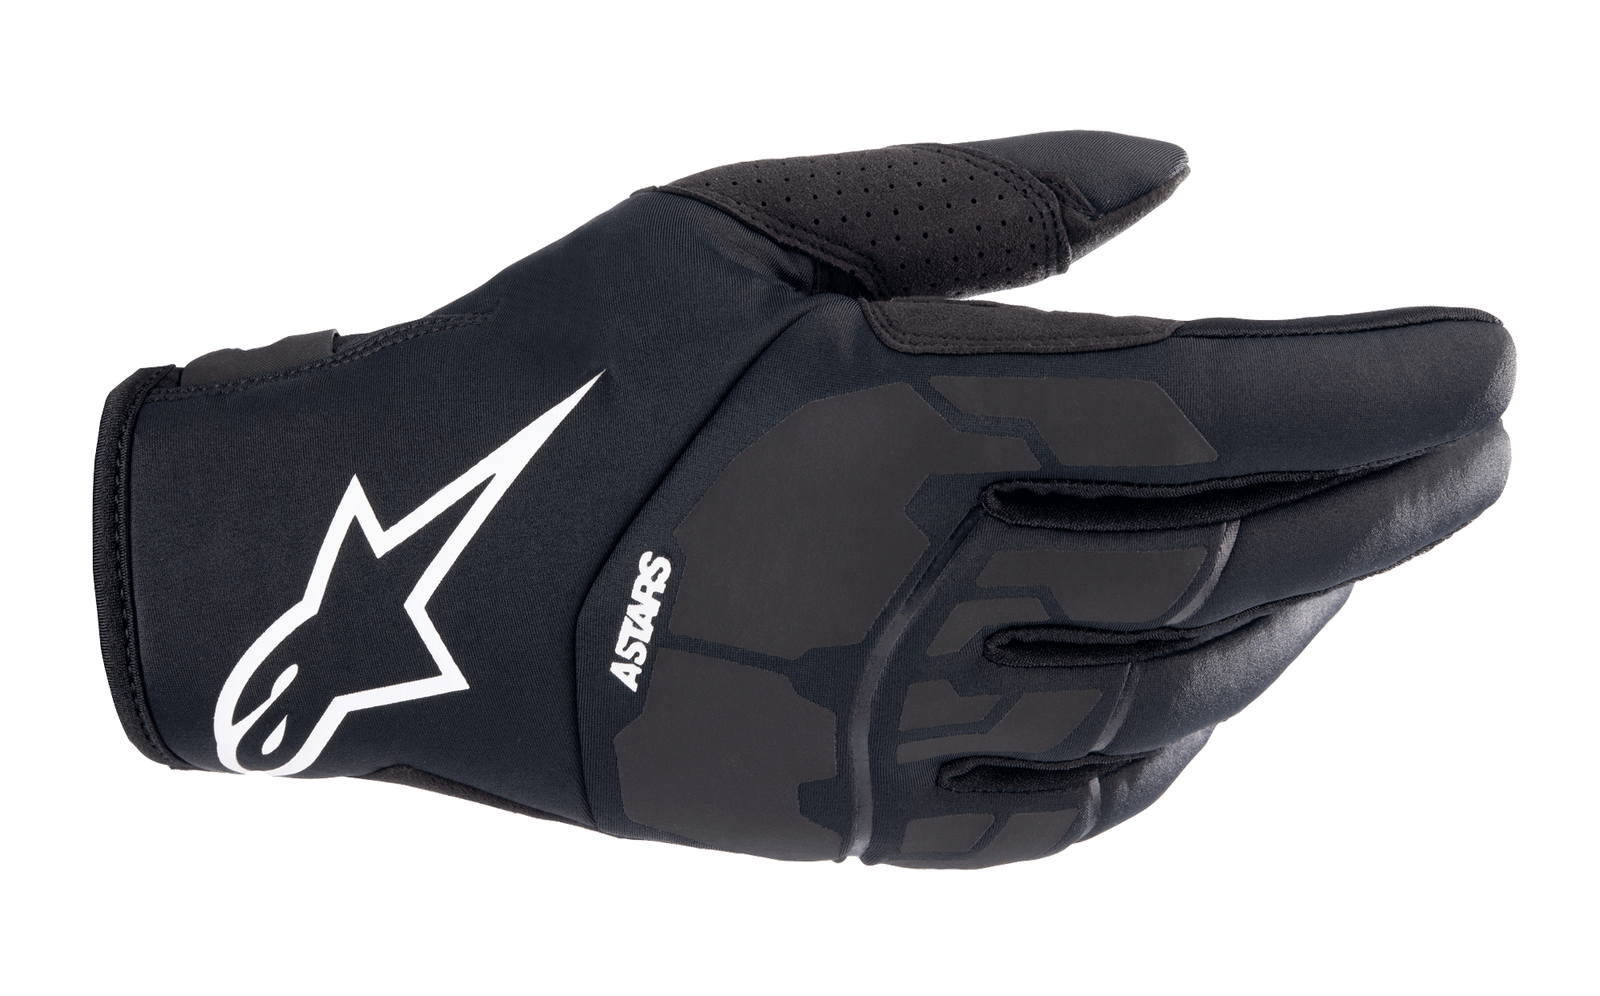 All Adventure Touring Products | Alpinestars® Official Site